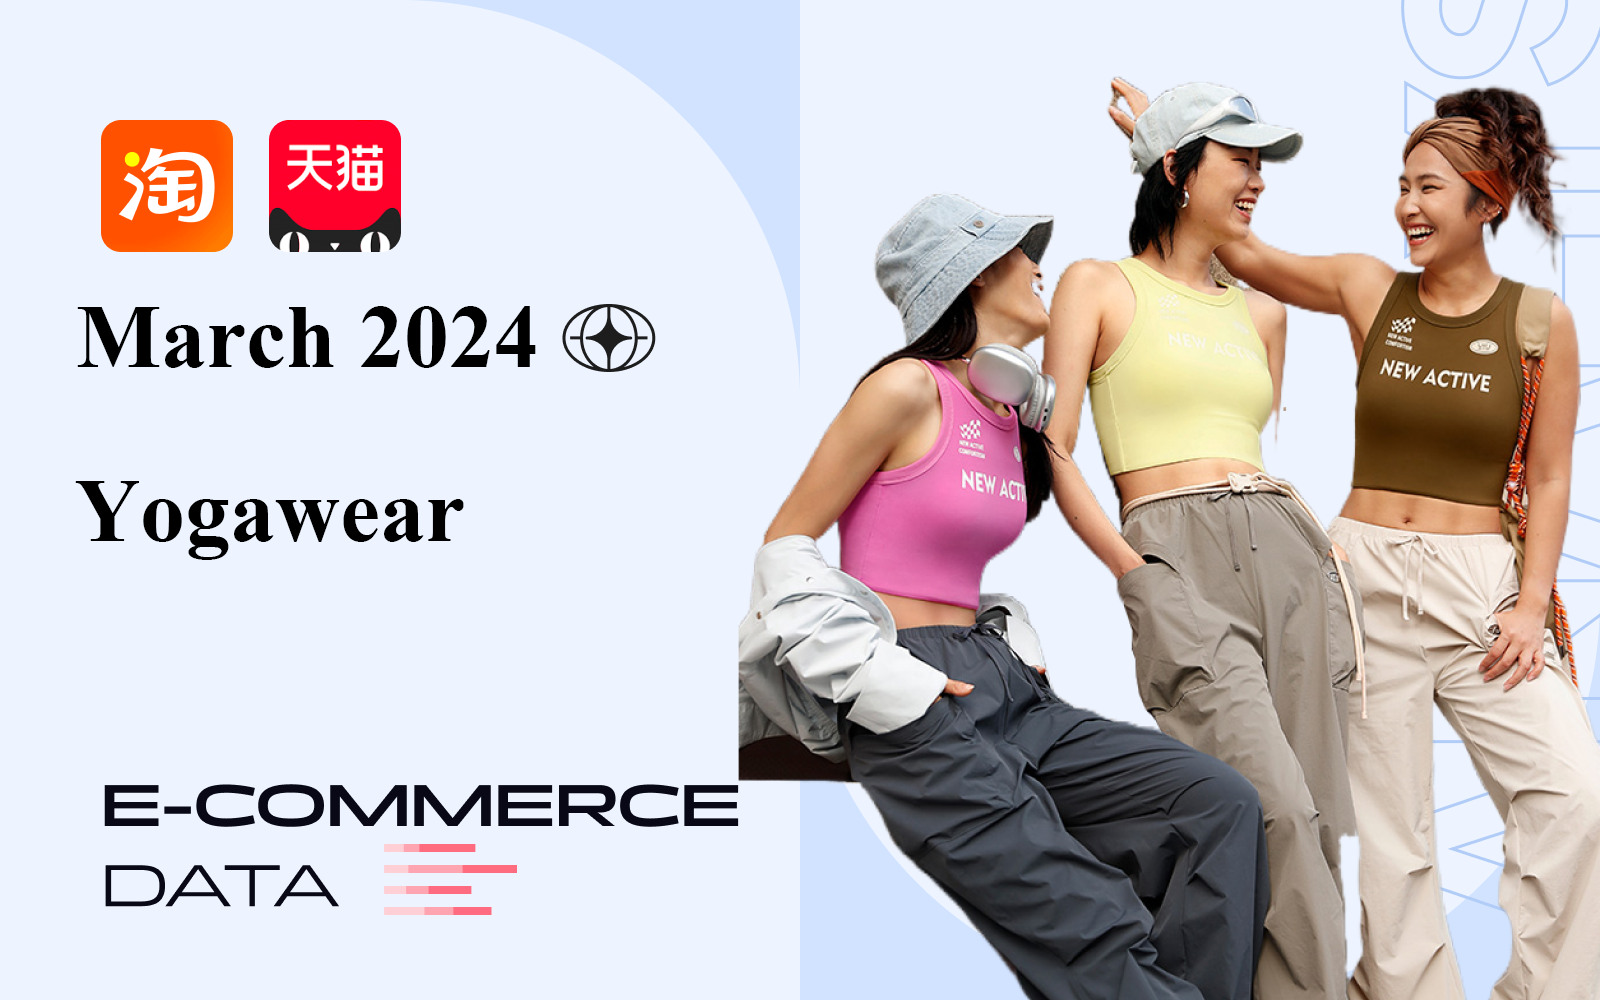 Yoga Fitness -- The Data Analysis of Womenswear E-Commerce in March